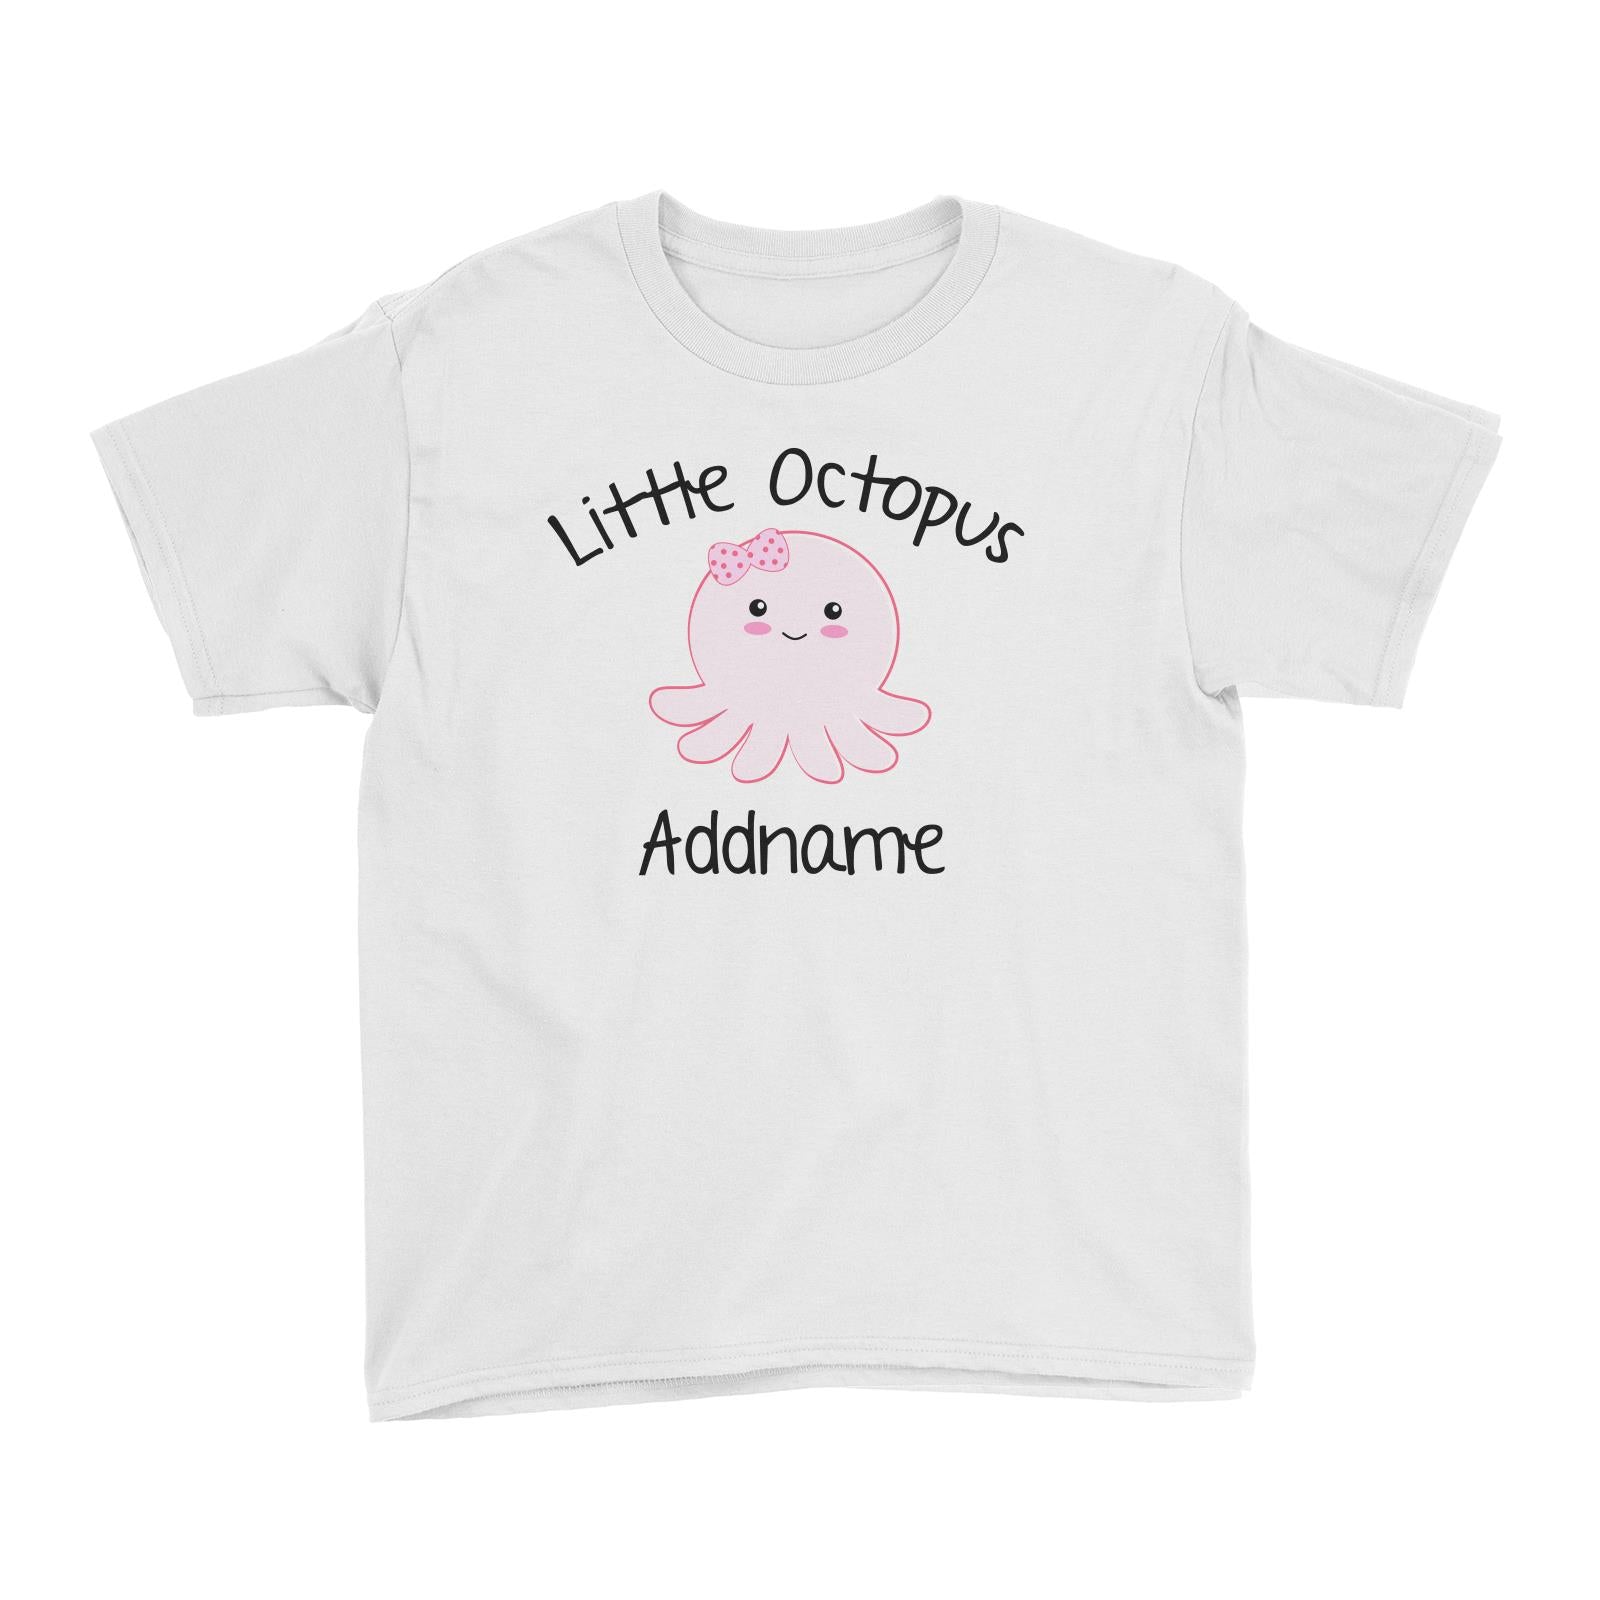 Cute Animals And Friends Series Little Octopus Girl Addname Kid's T-Shirt